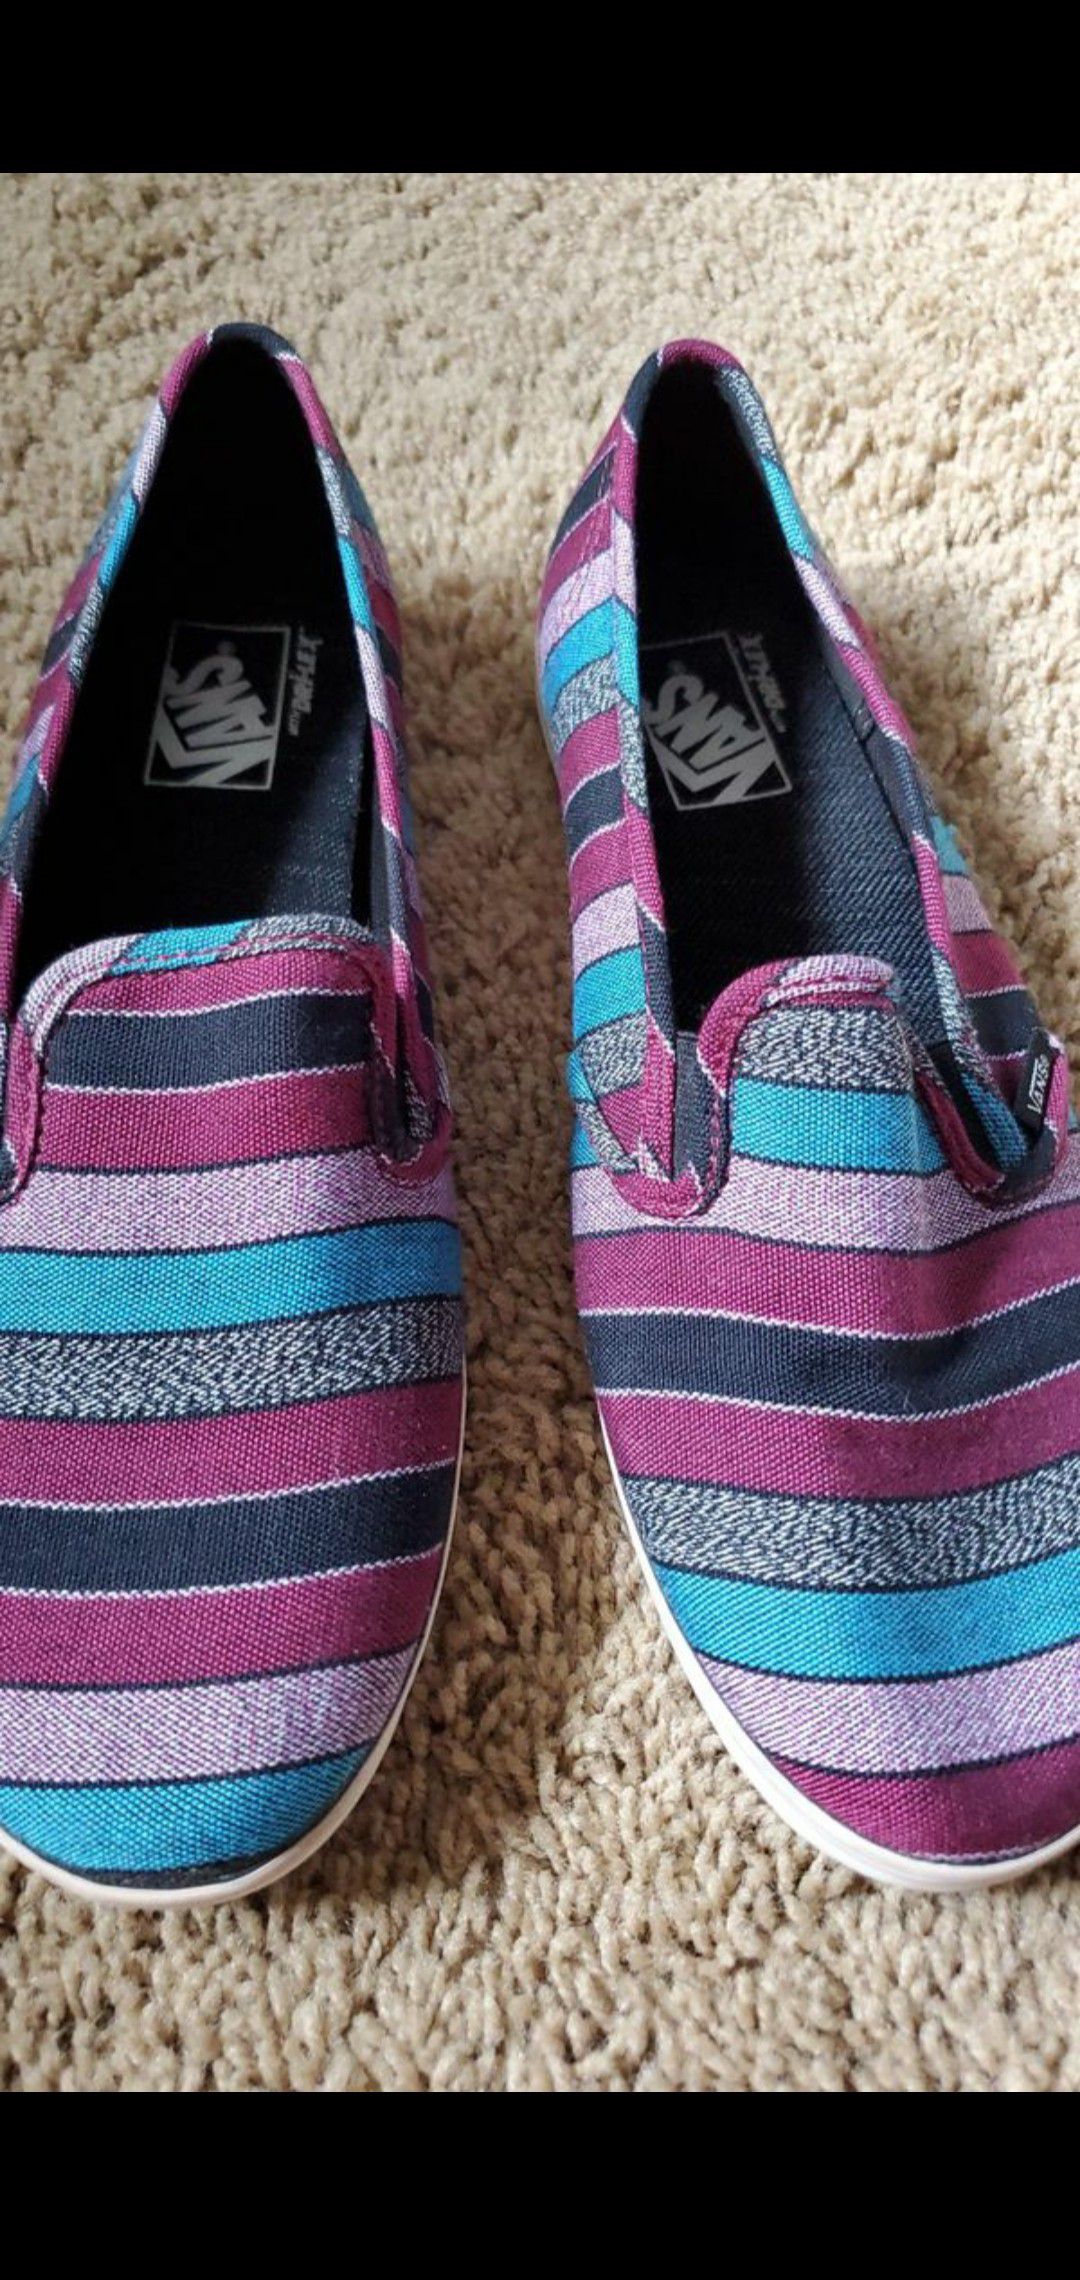 Striped purple and blue low top women's VANS size 10.5